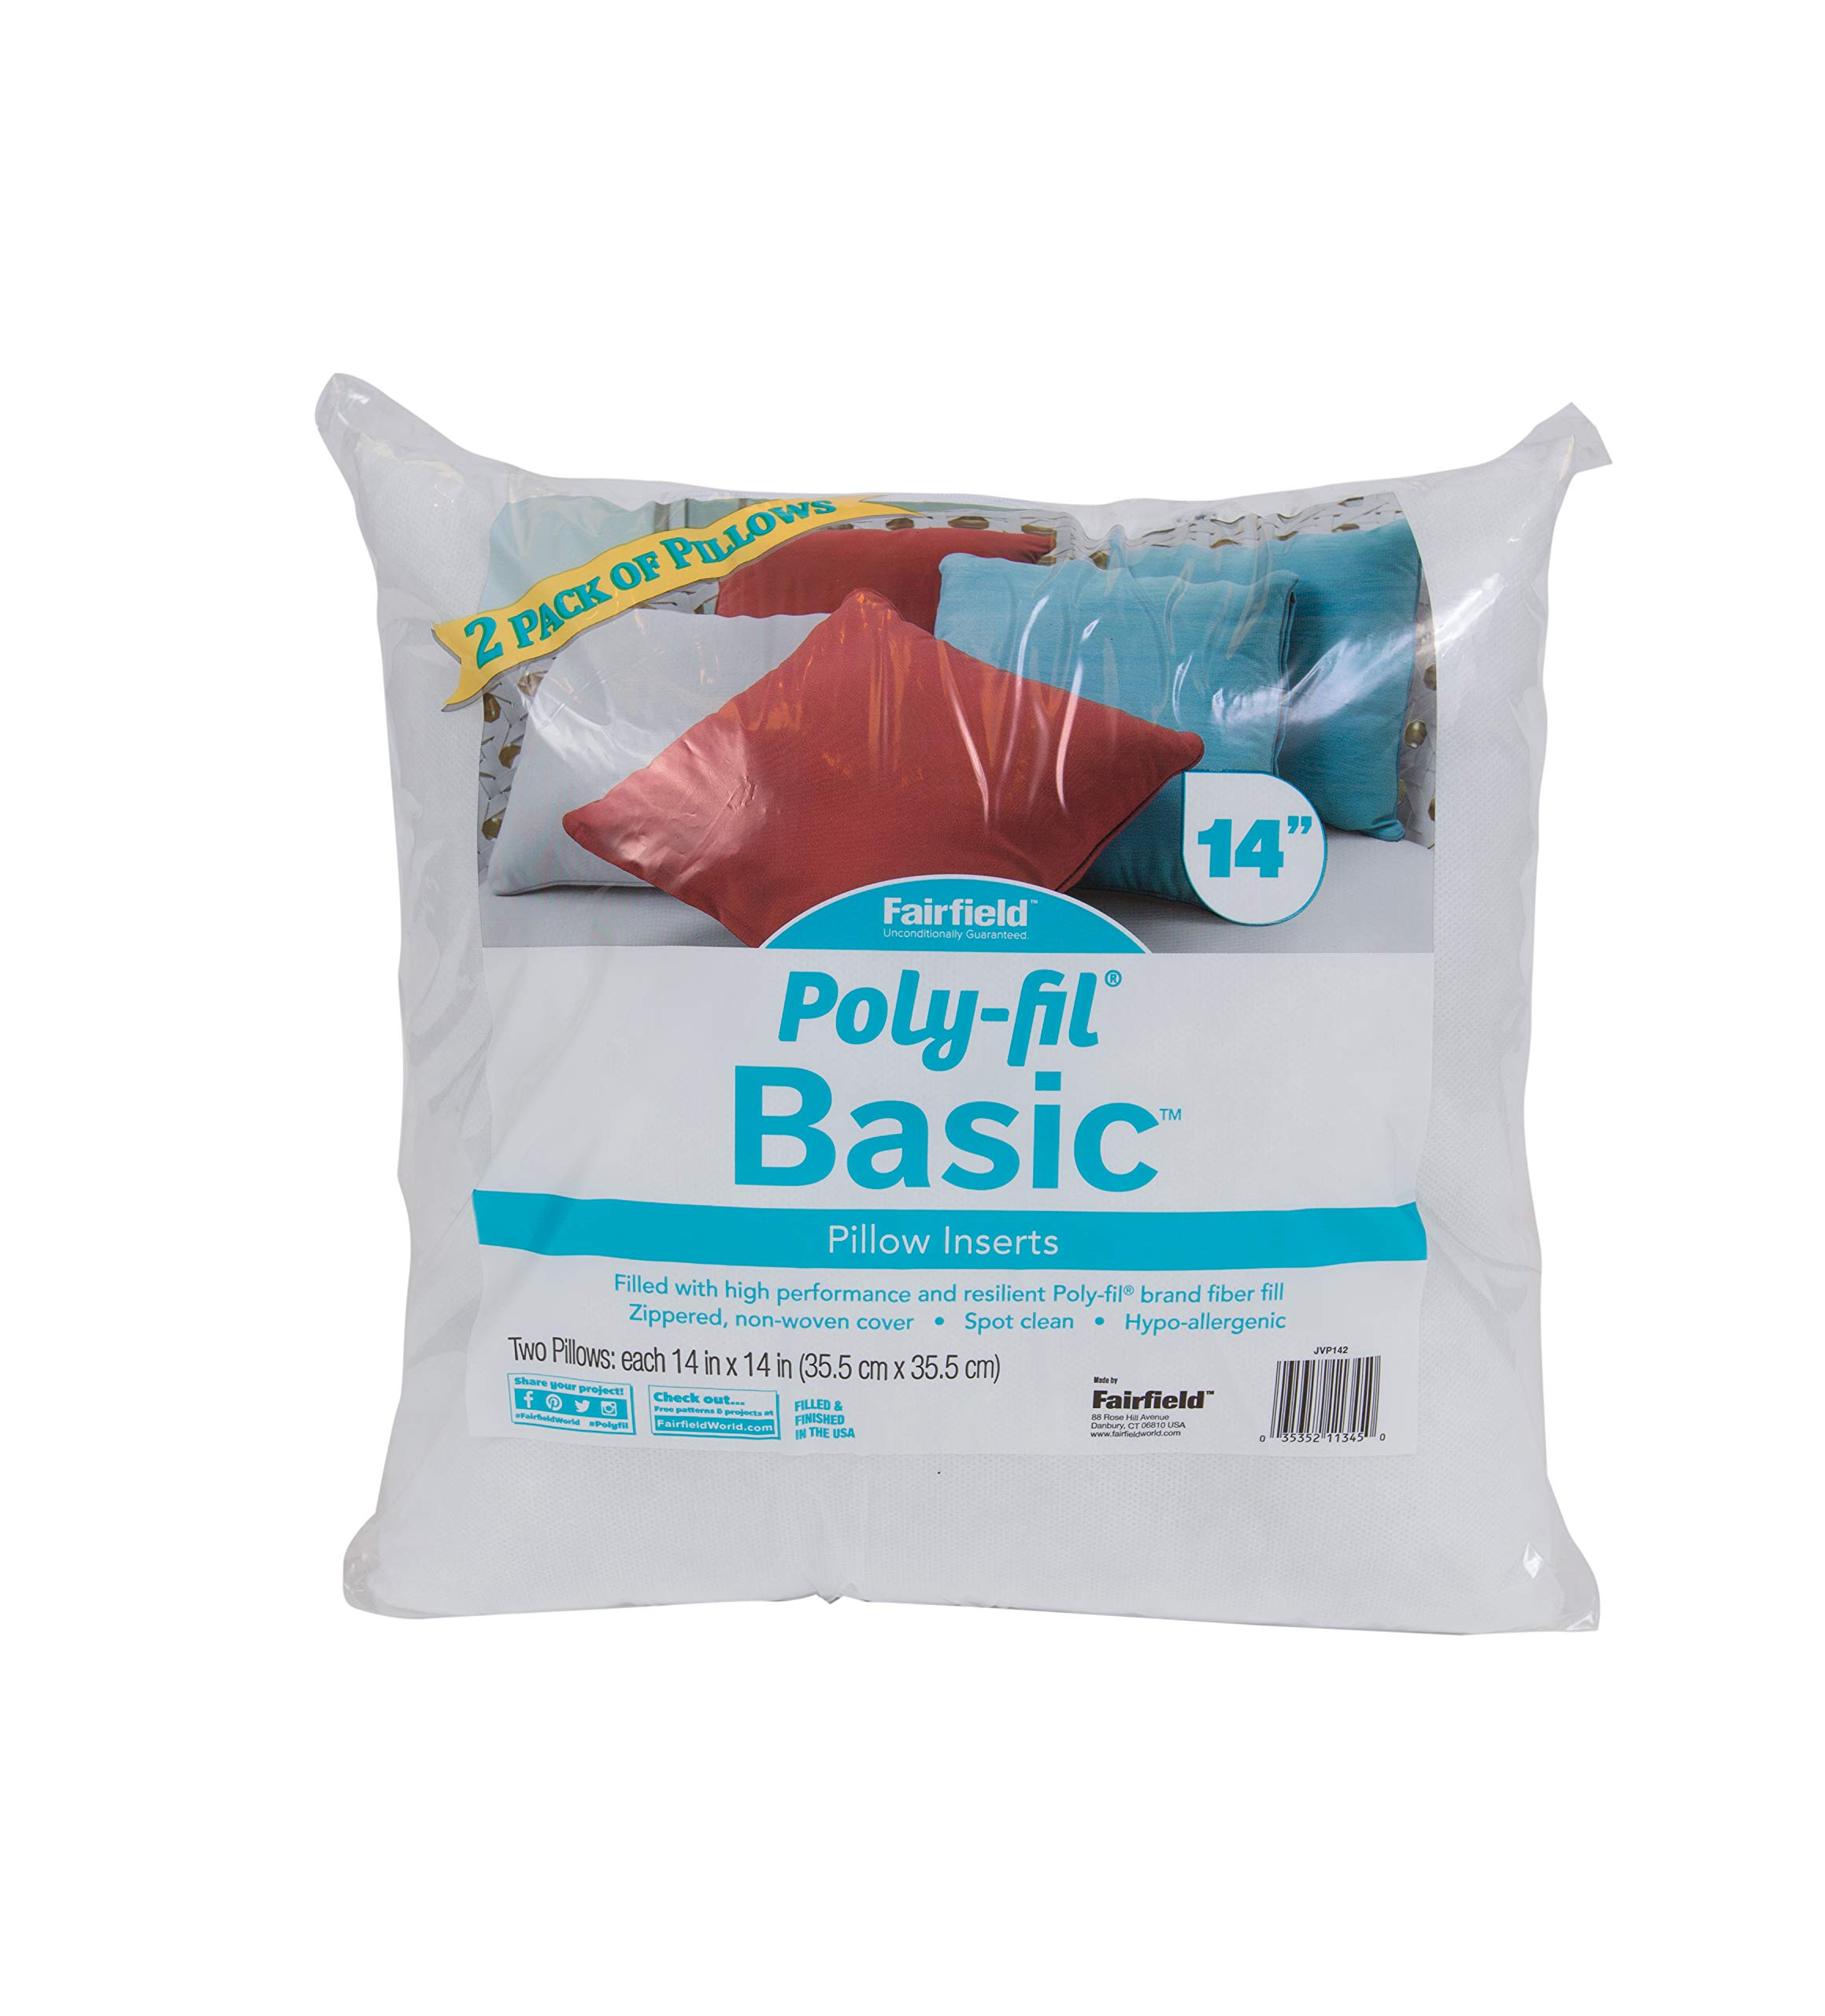 Fairfield Poly-Fil Basic Decorative Throw Pillows Inserts (2 Pack) 2 Count  (Pack of 1) White